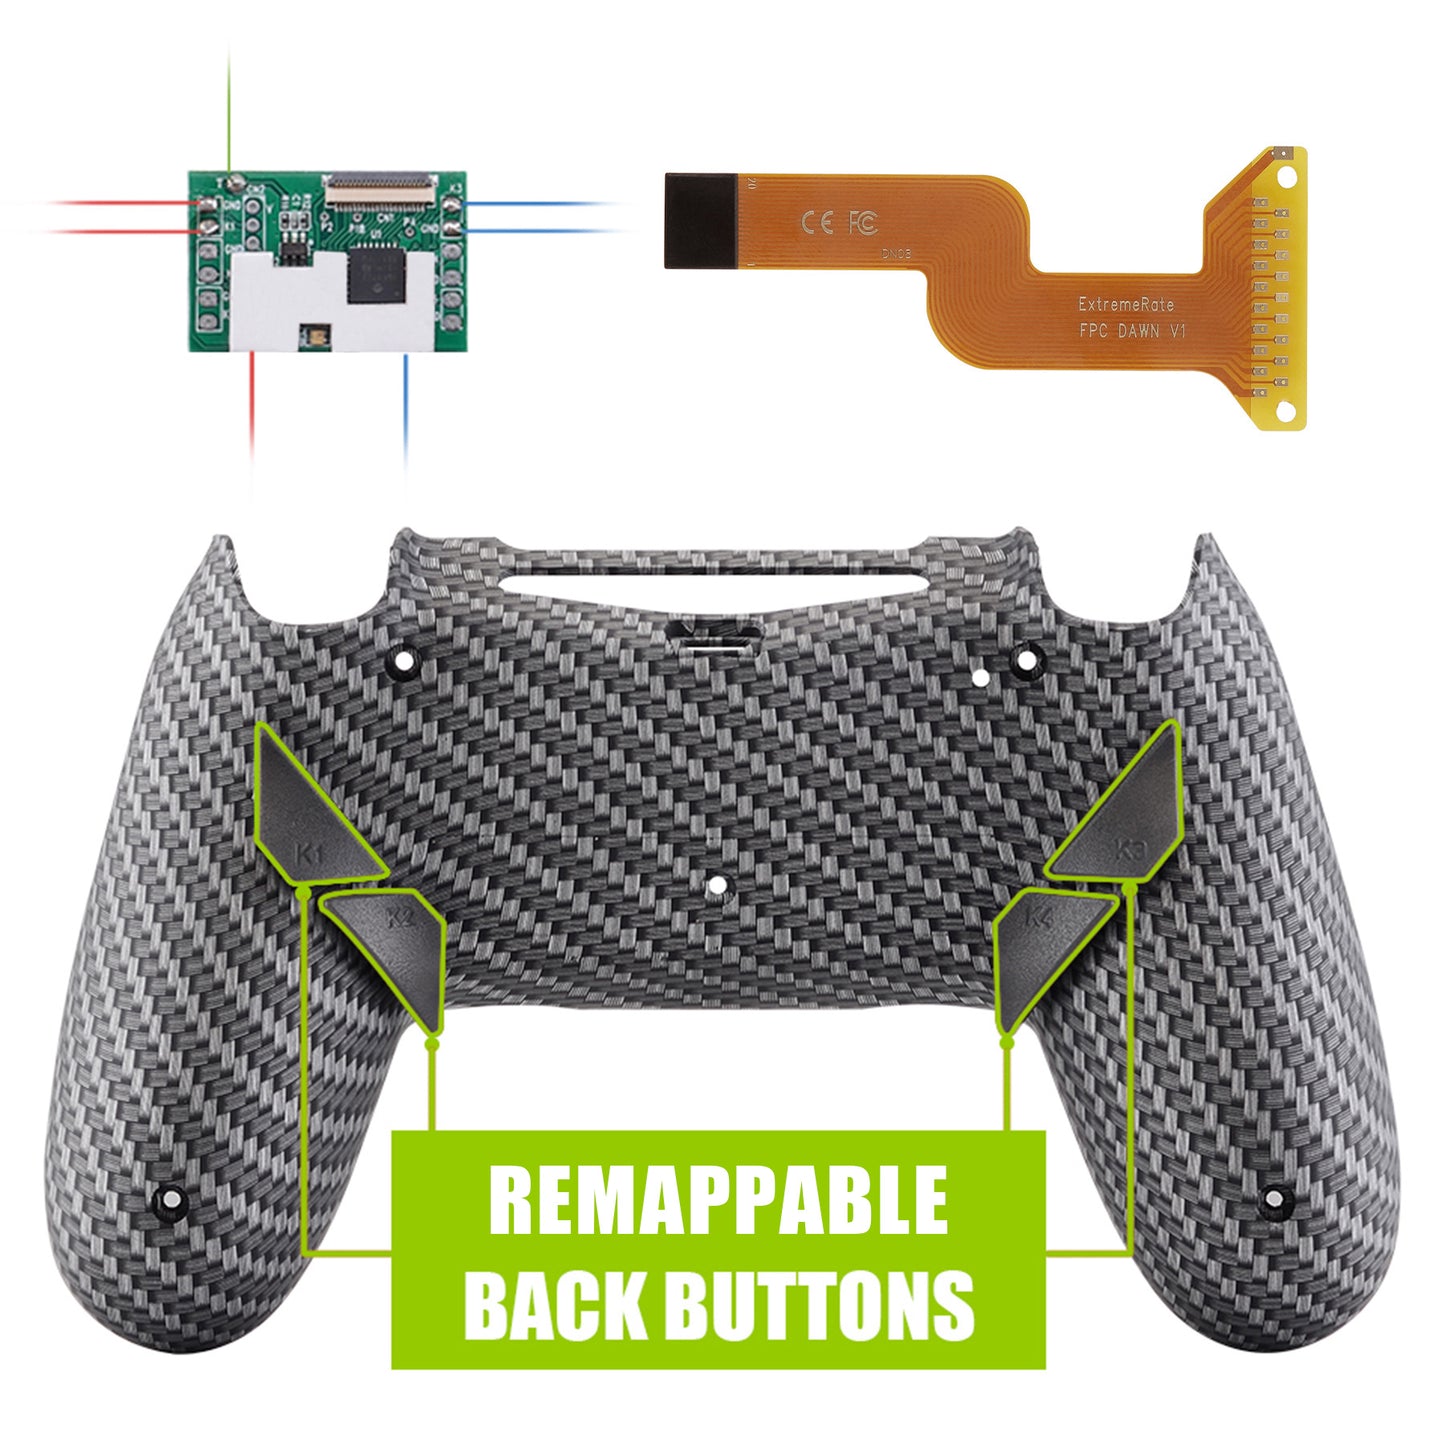 Black Silver Carbon Fiber Patterned Dawn Remappable Remap Kit with Redesigned Back Shell & 4 Back Buttons for ps4 Controller JDM 040/050/055 - P4RM003 eXtremeRate